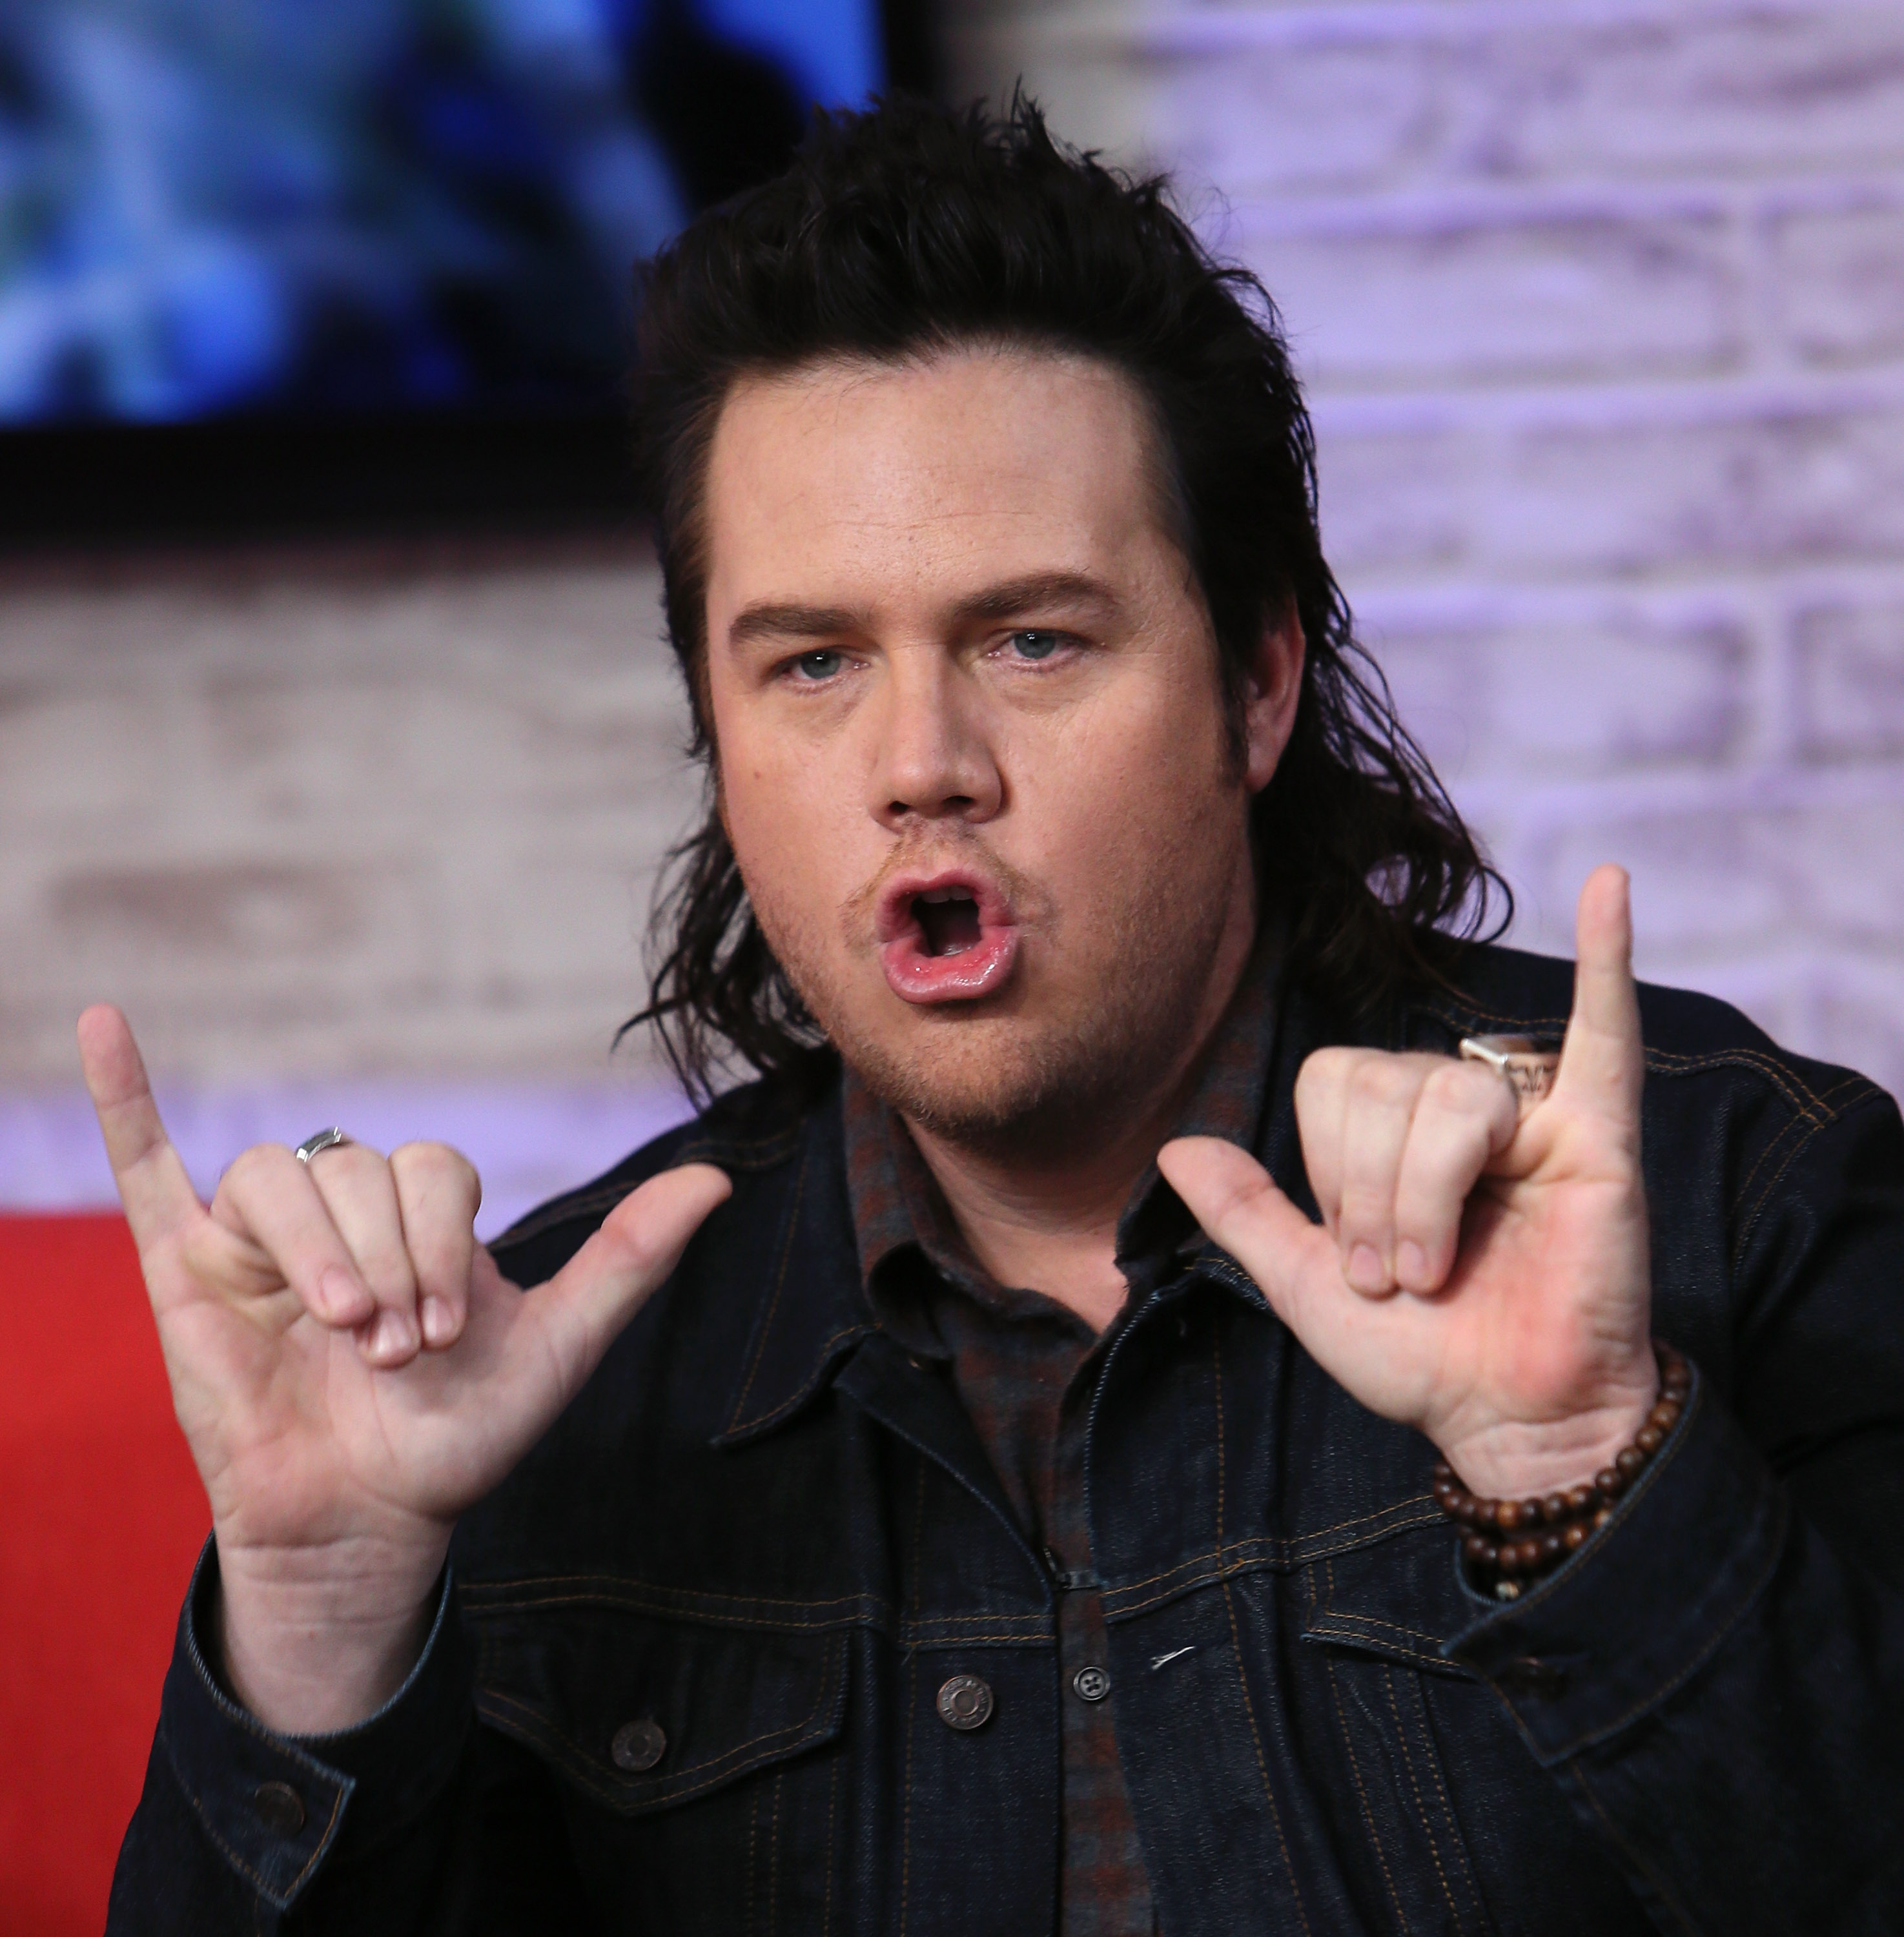 Josh McDermitt of The Walking Dead on Last Call with Carson Daly - Undead Walking